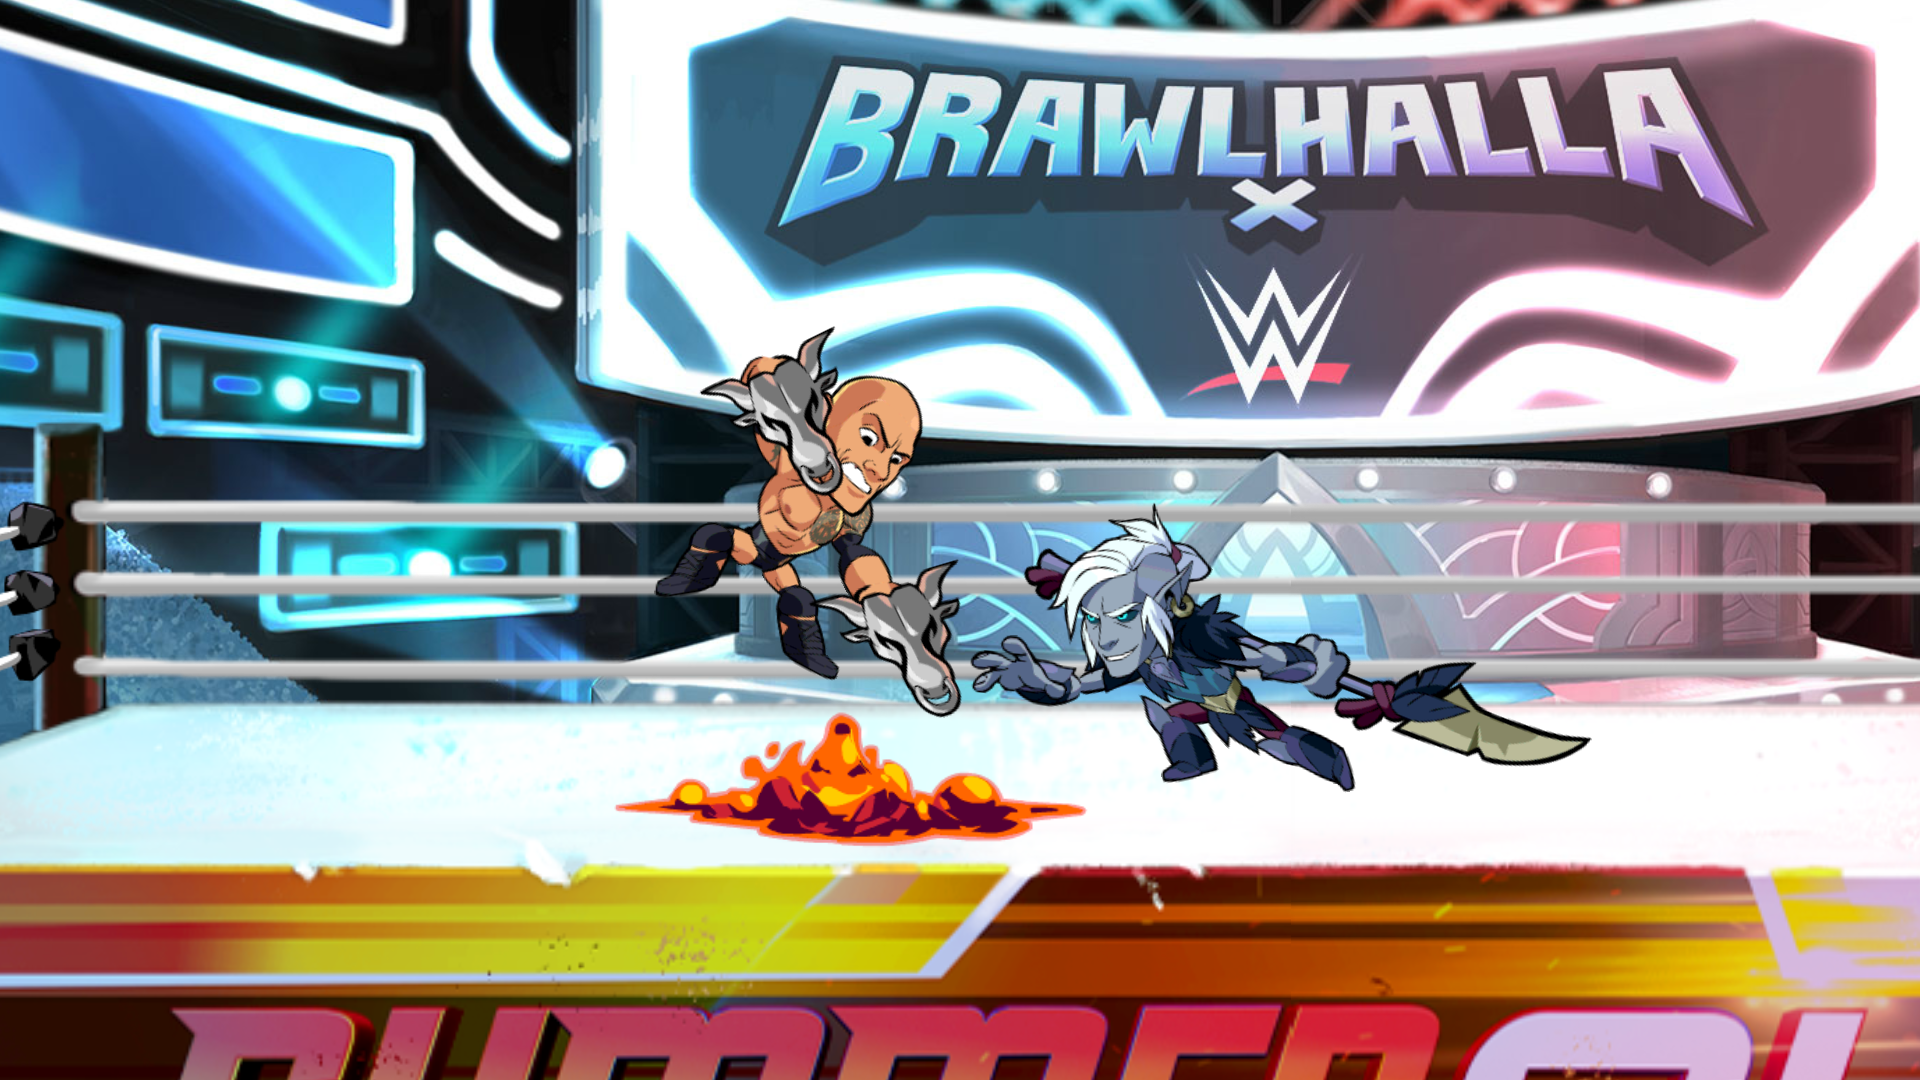 WWE Superstars Including Dwayne “The Rock” Johnson Now Playable In Brawlhalla